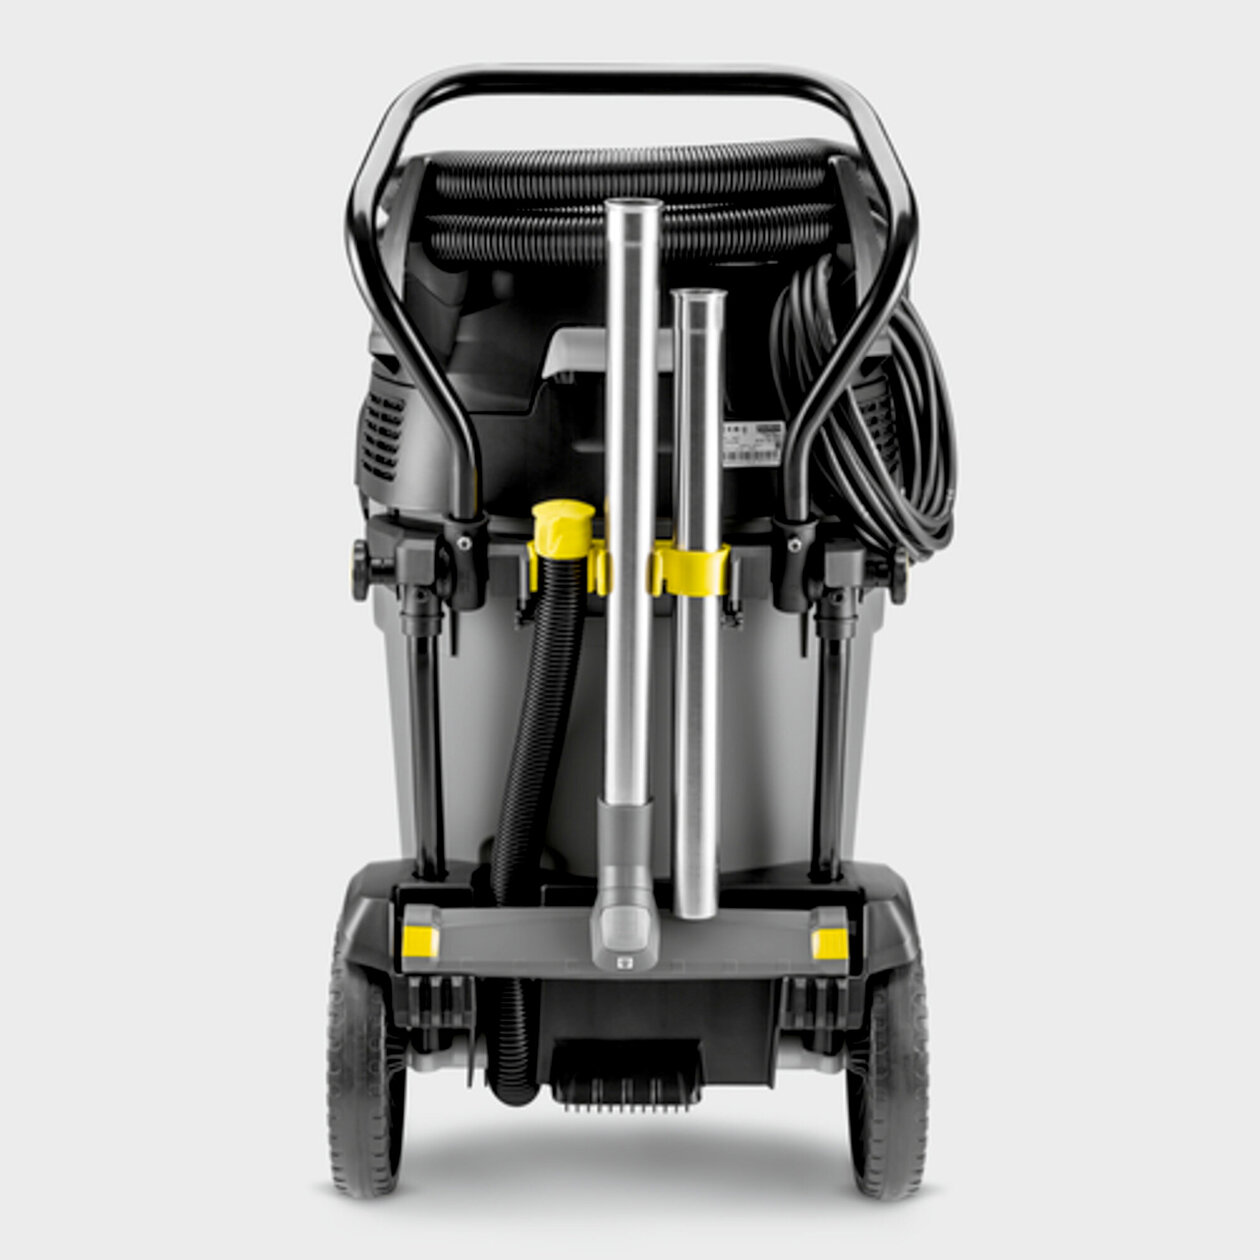 Wet and dry vacuum cleaner NT 65/2 Tact²: Smart accessory storage